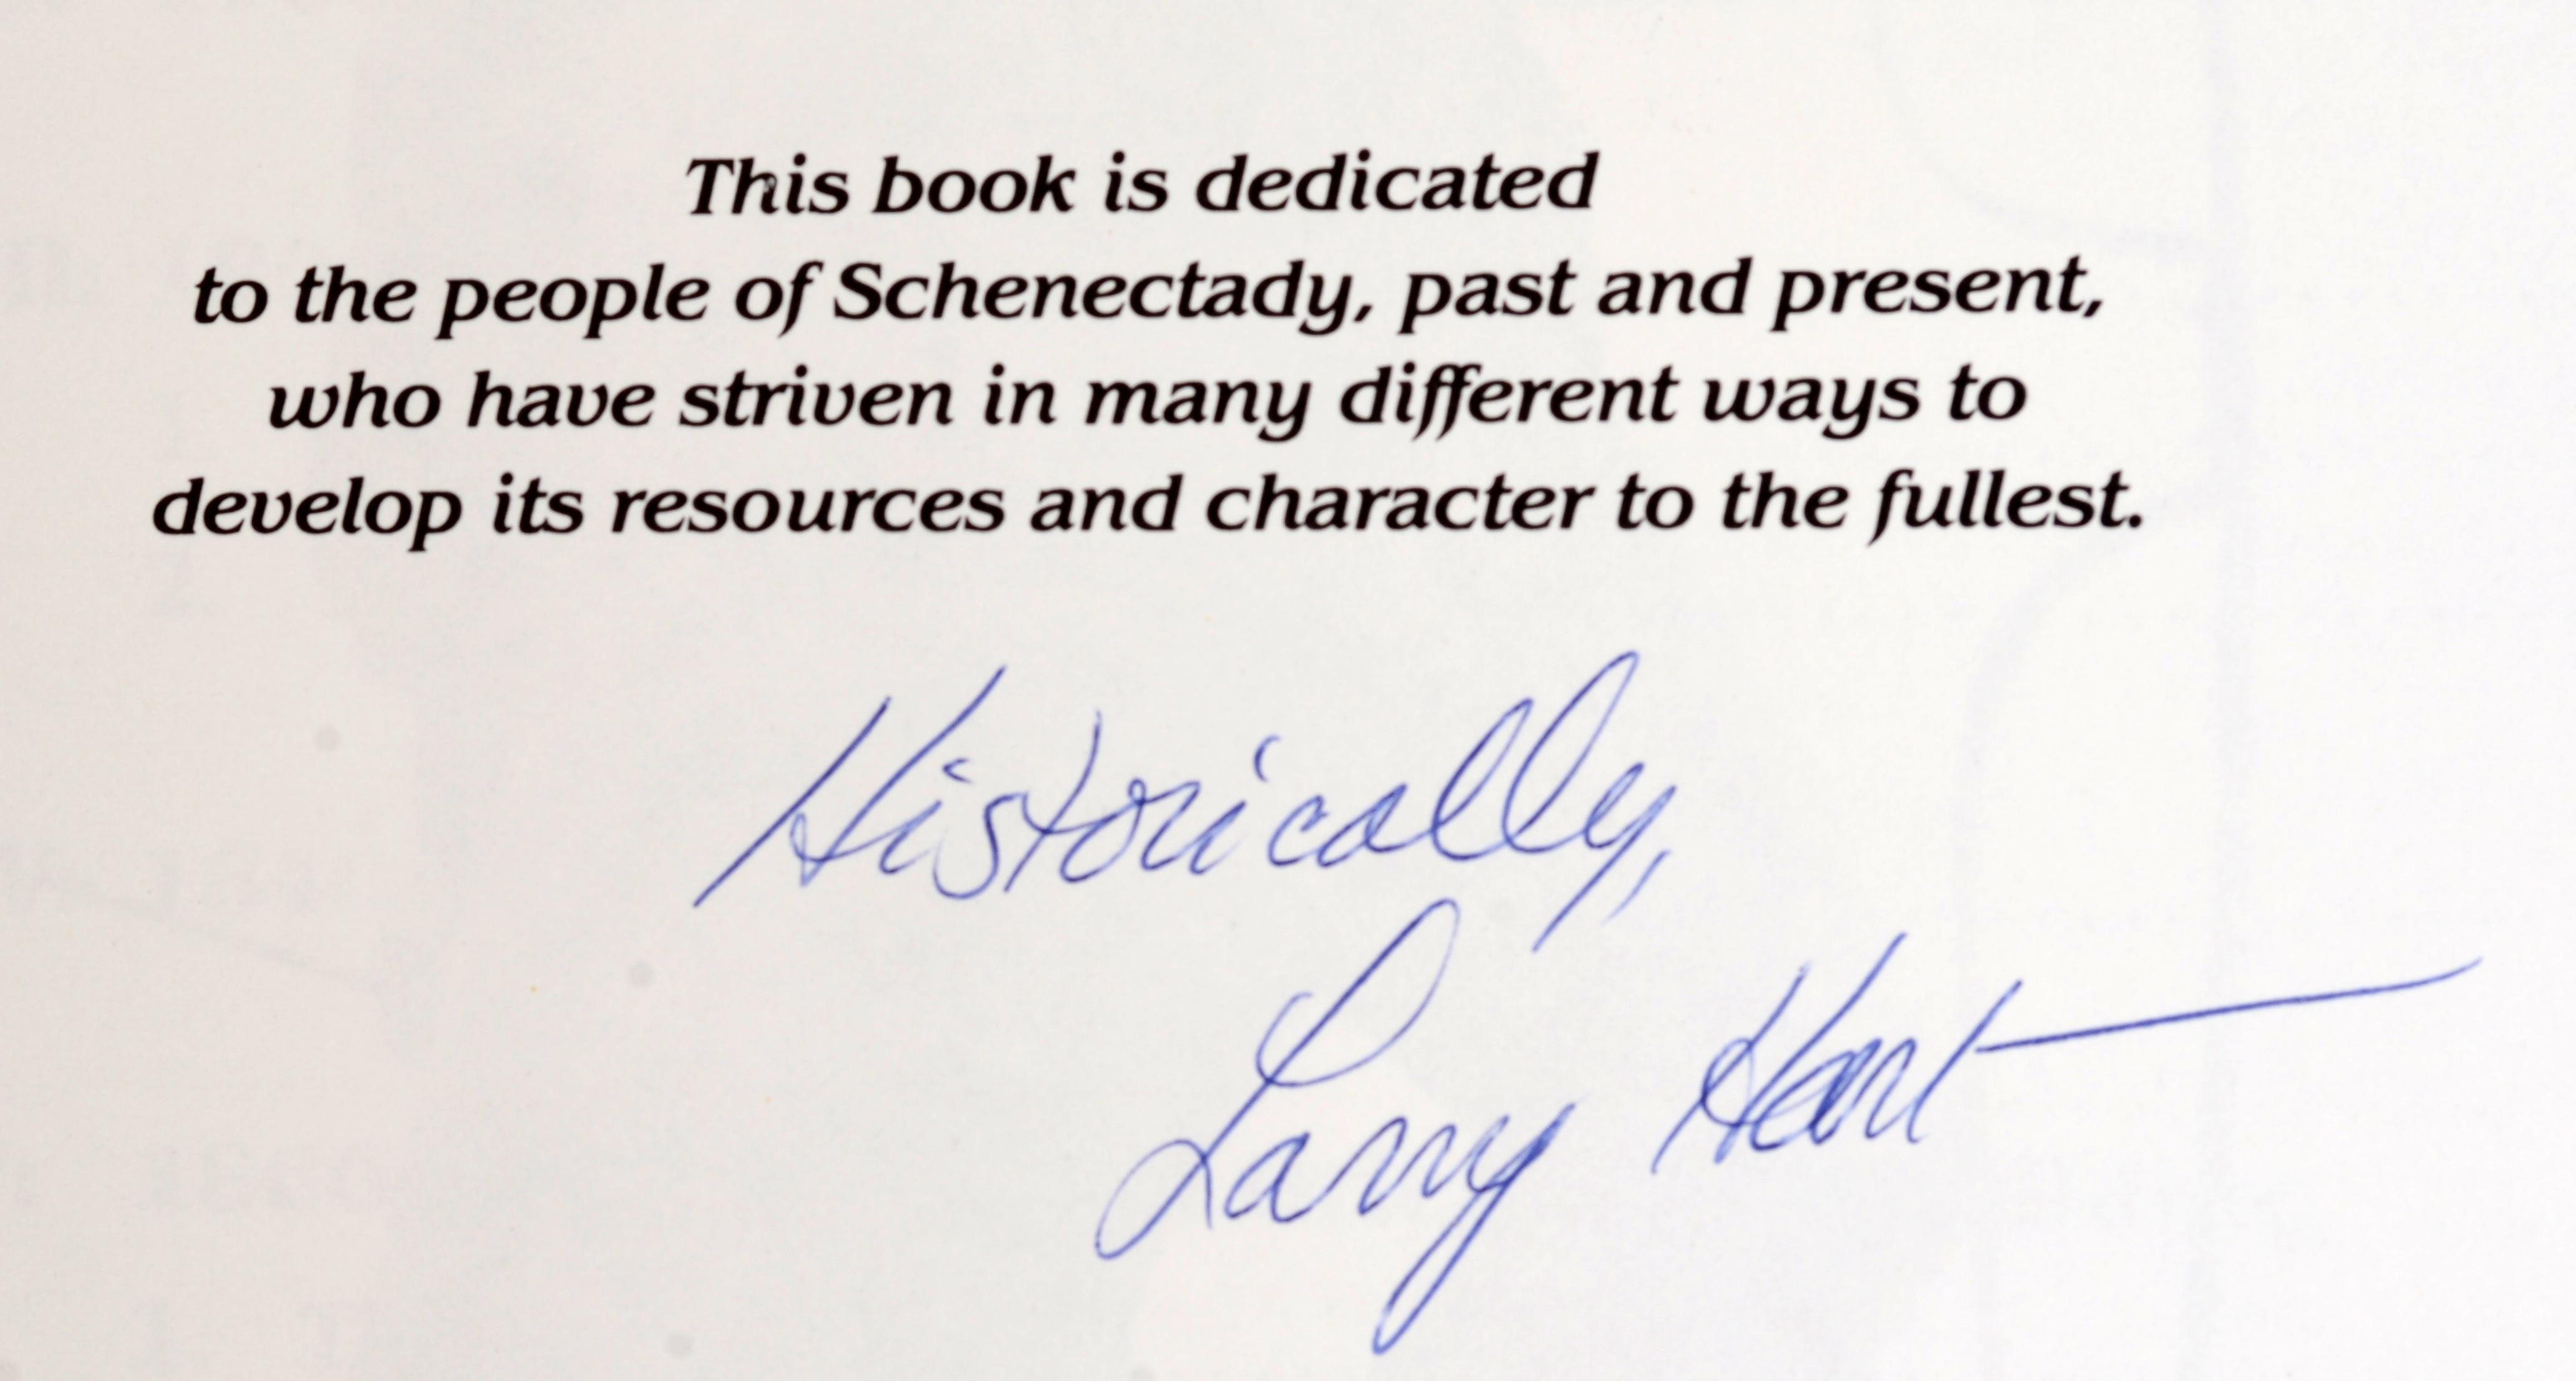 Schenectady: a Pictorial History. Schenectady's First Complete Story-Pre-Settlement to Present Written and Signed by Larry Hart. Old Dorp Books, 1990. 2nd Ed softcover. Schenectady was first settled in 1661 when the area was part of the Dutch colony